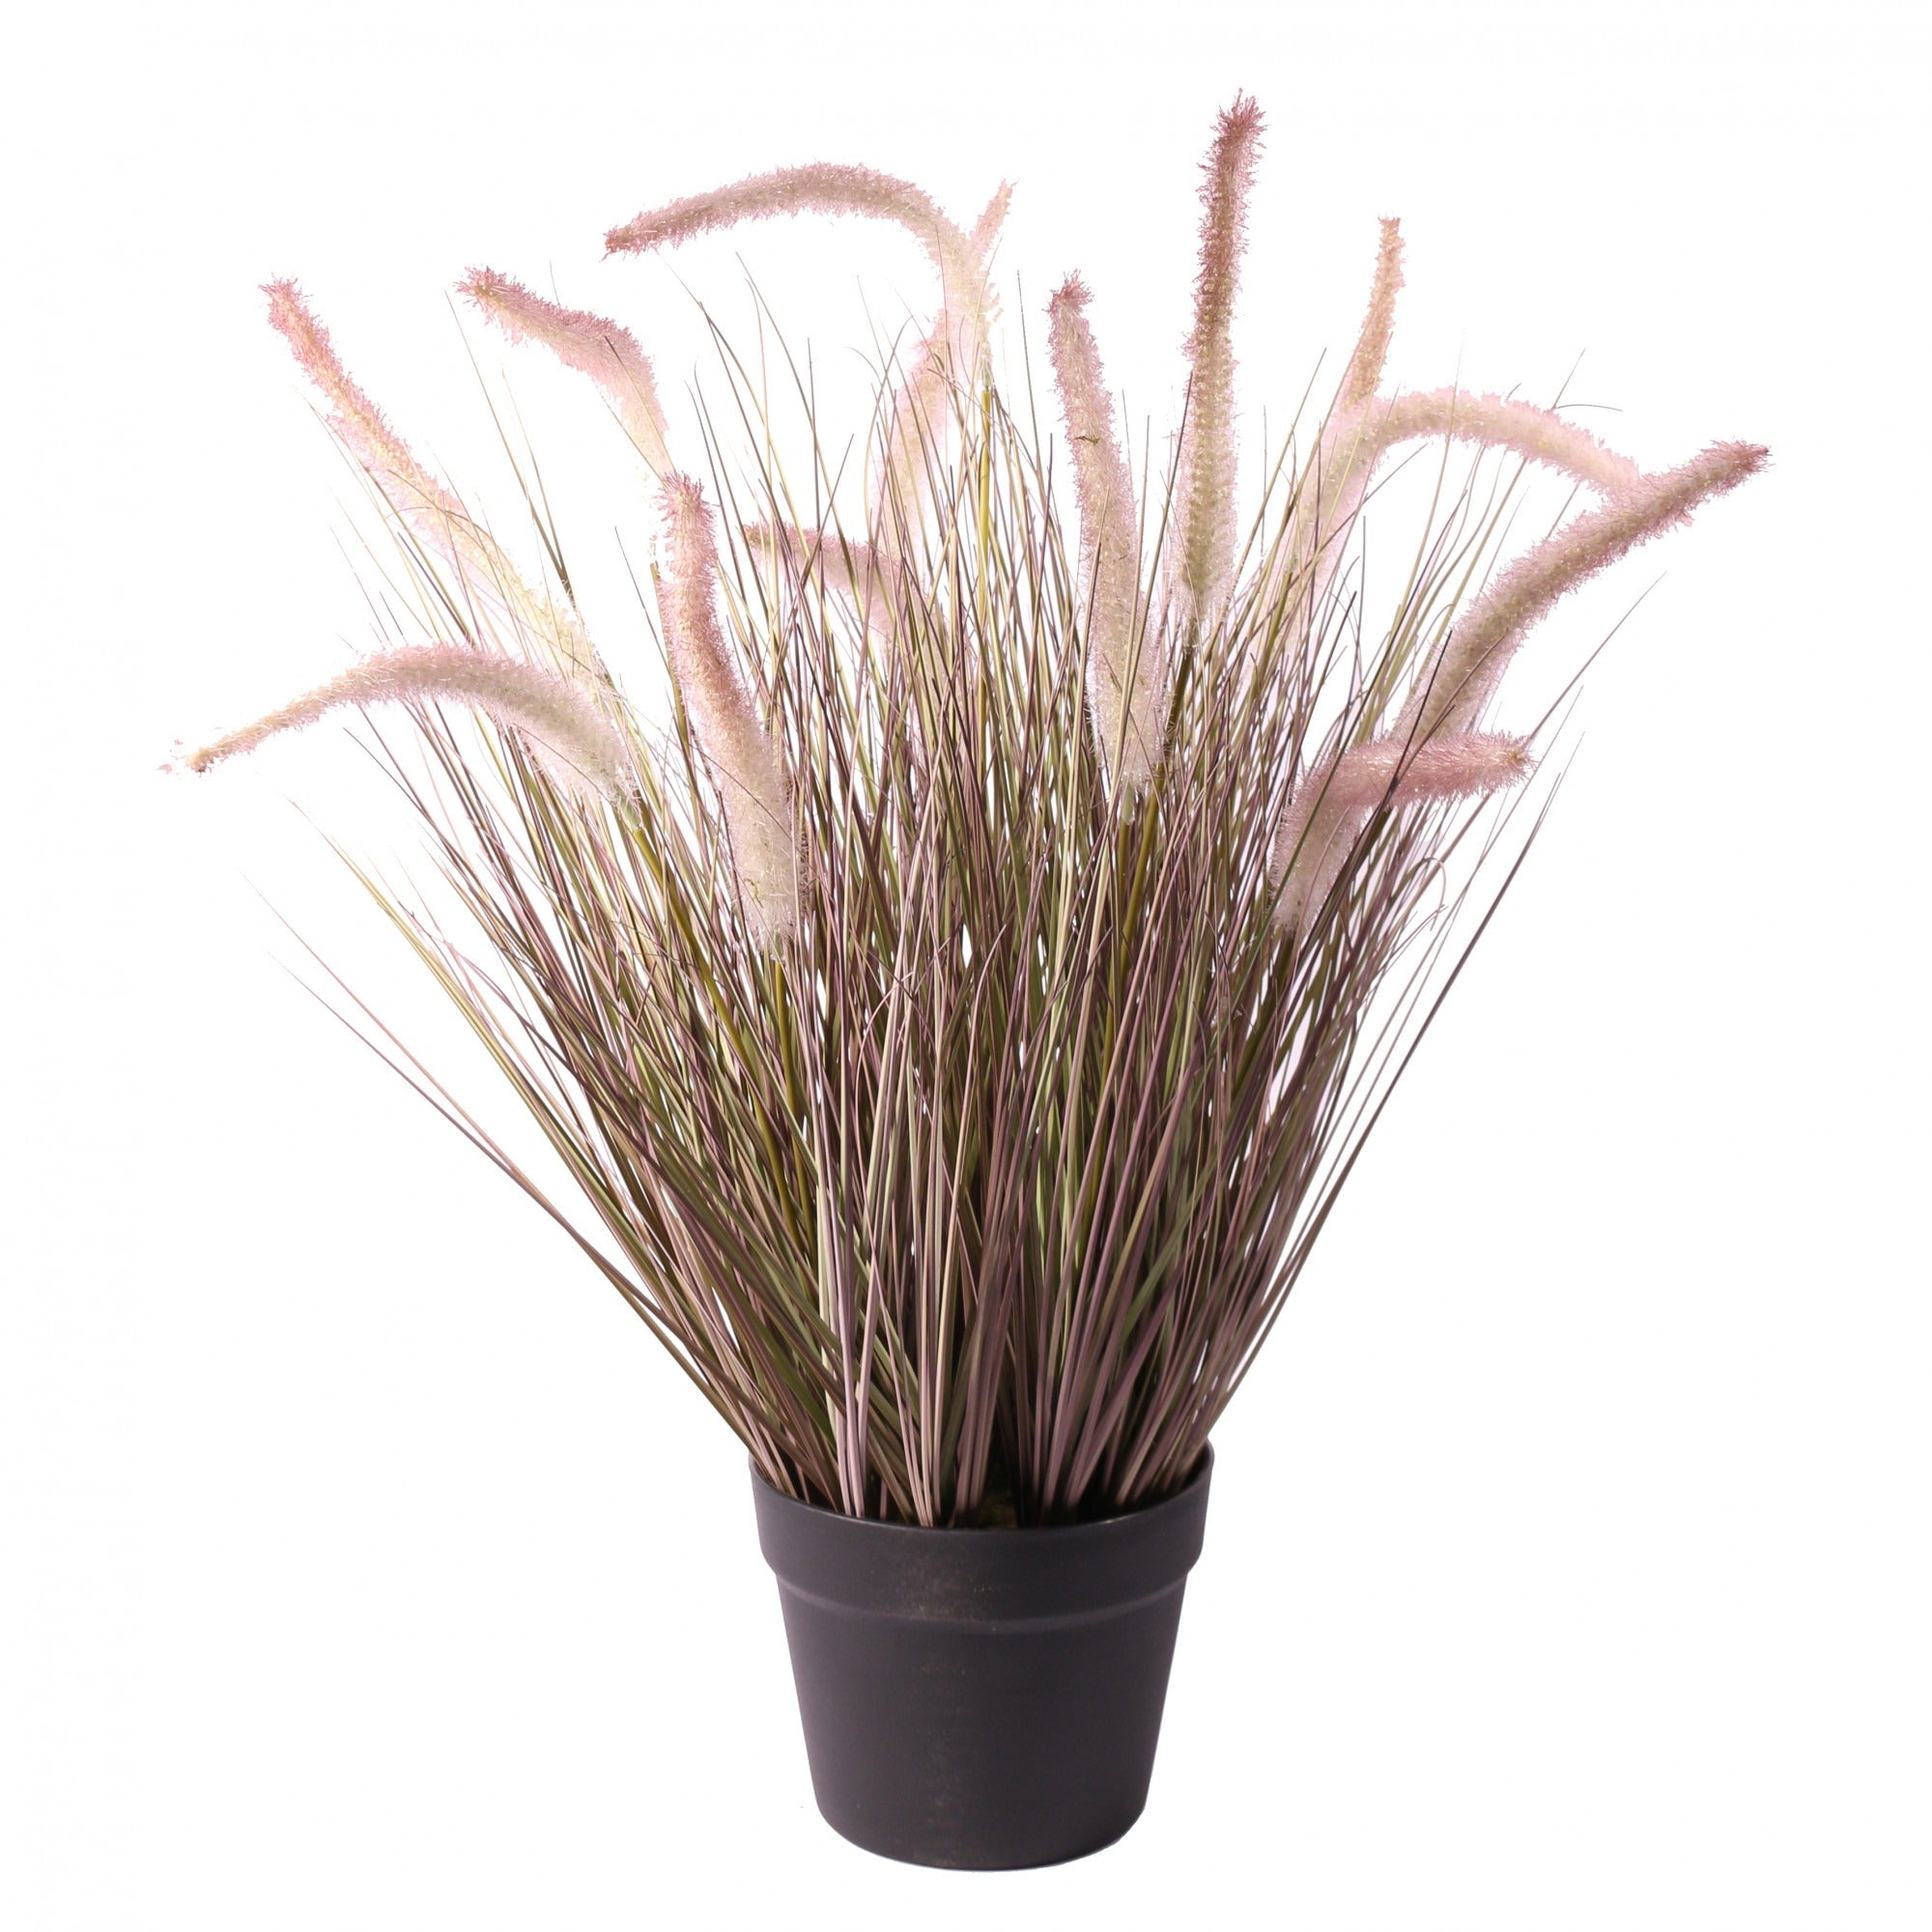 View Potted Pennisetum Grass 60cm information